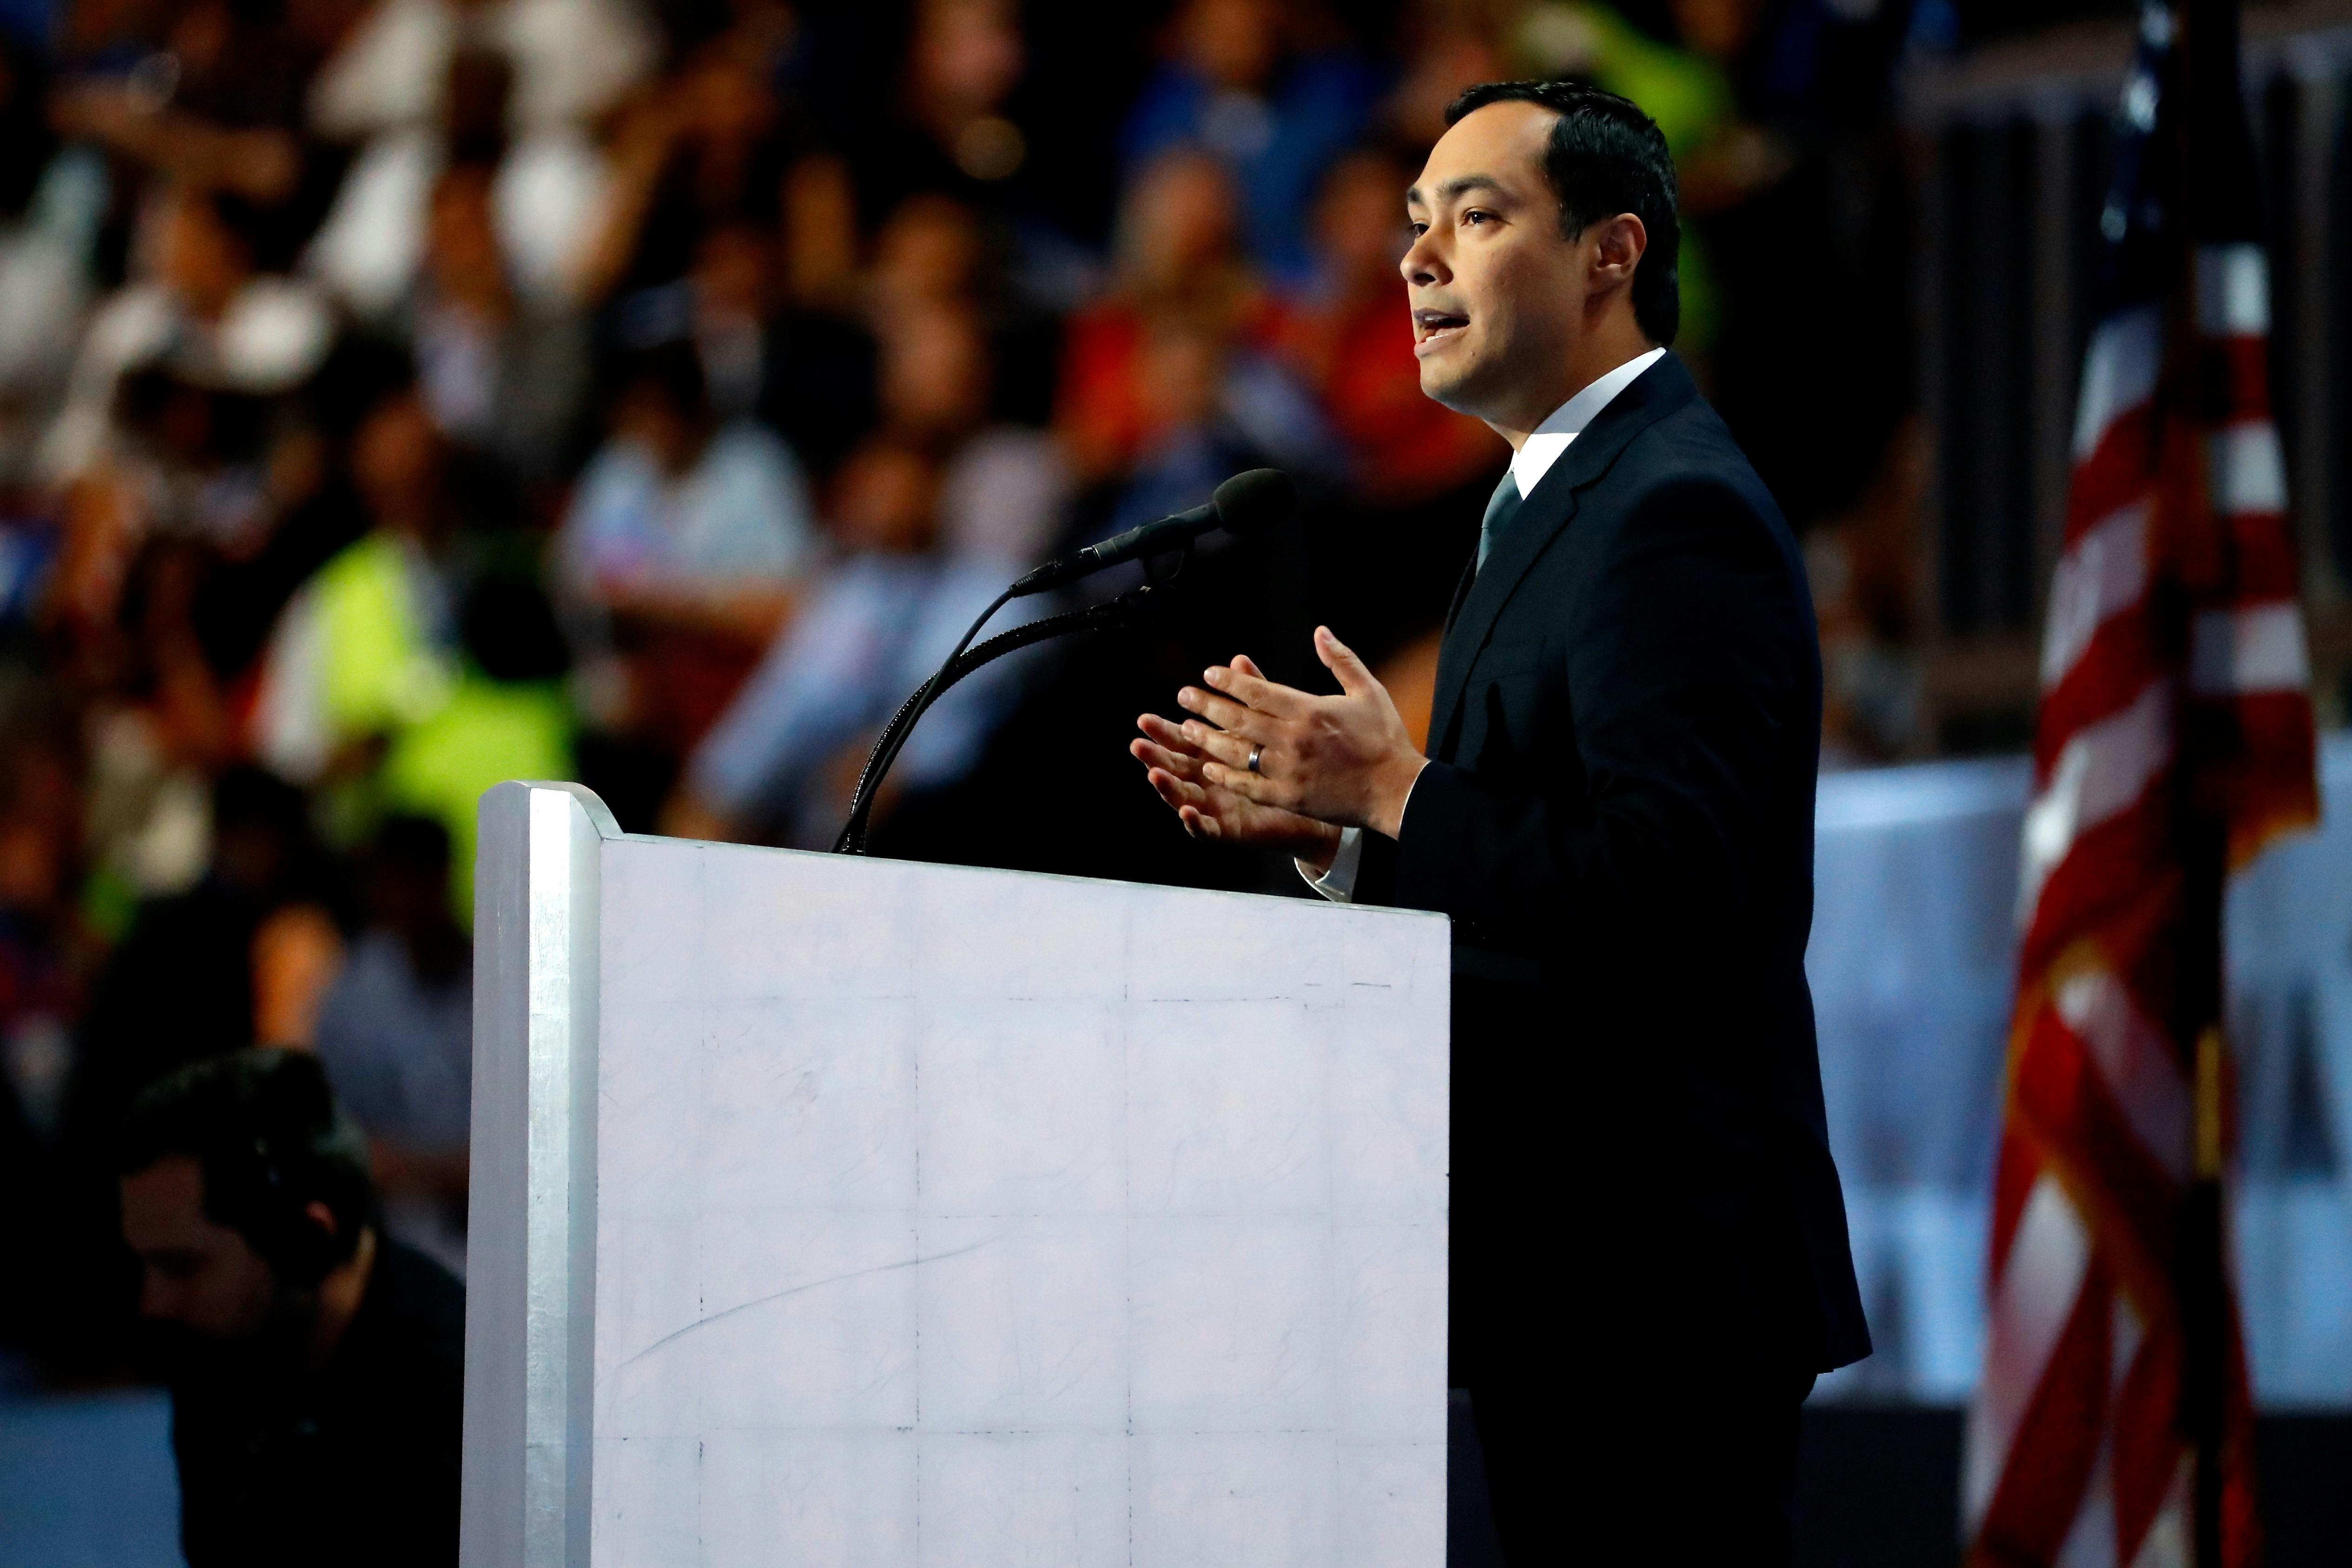 U.S. Representative Joaquin Castro (D-TX) delivers remarks on the fourth day of the Democratic National Convention at the Wells Fargo Center, July 28, 2016 in Philadelphia, Pennsylvania.